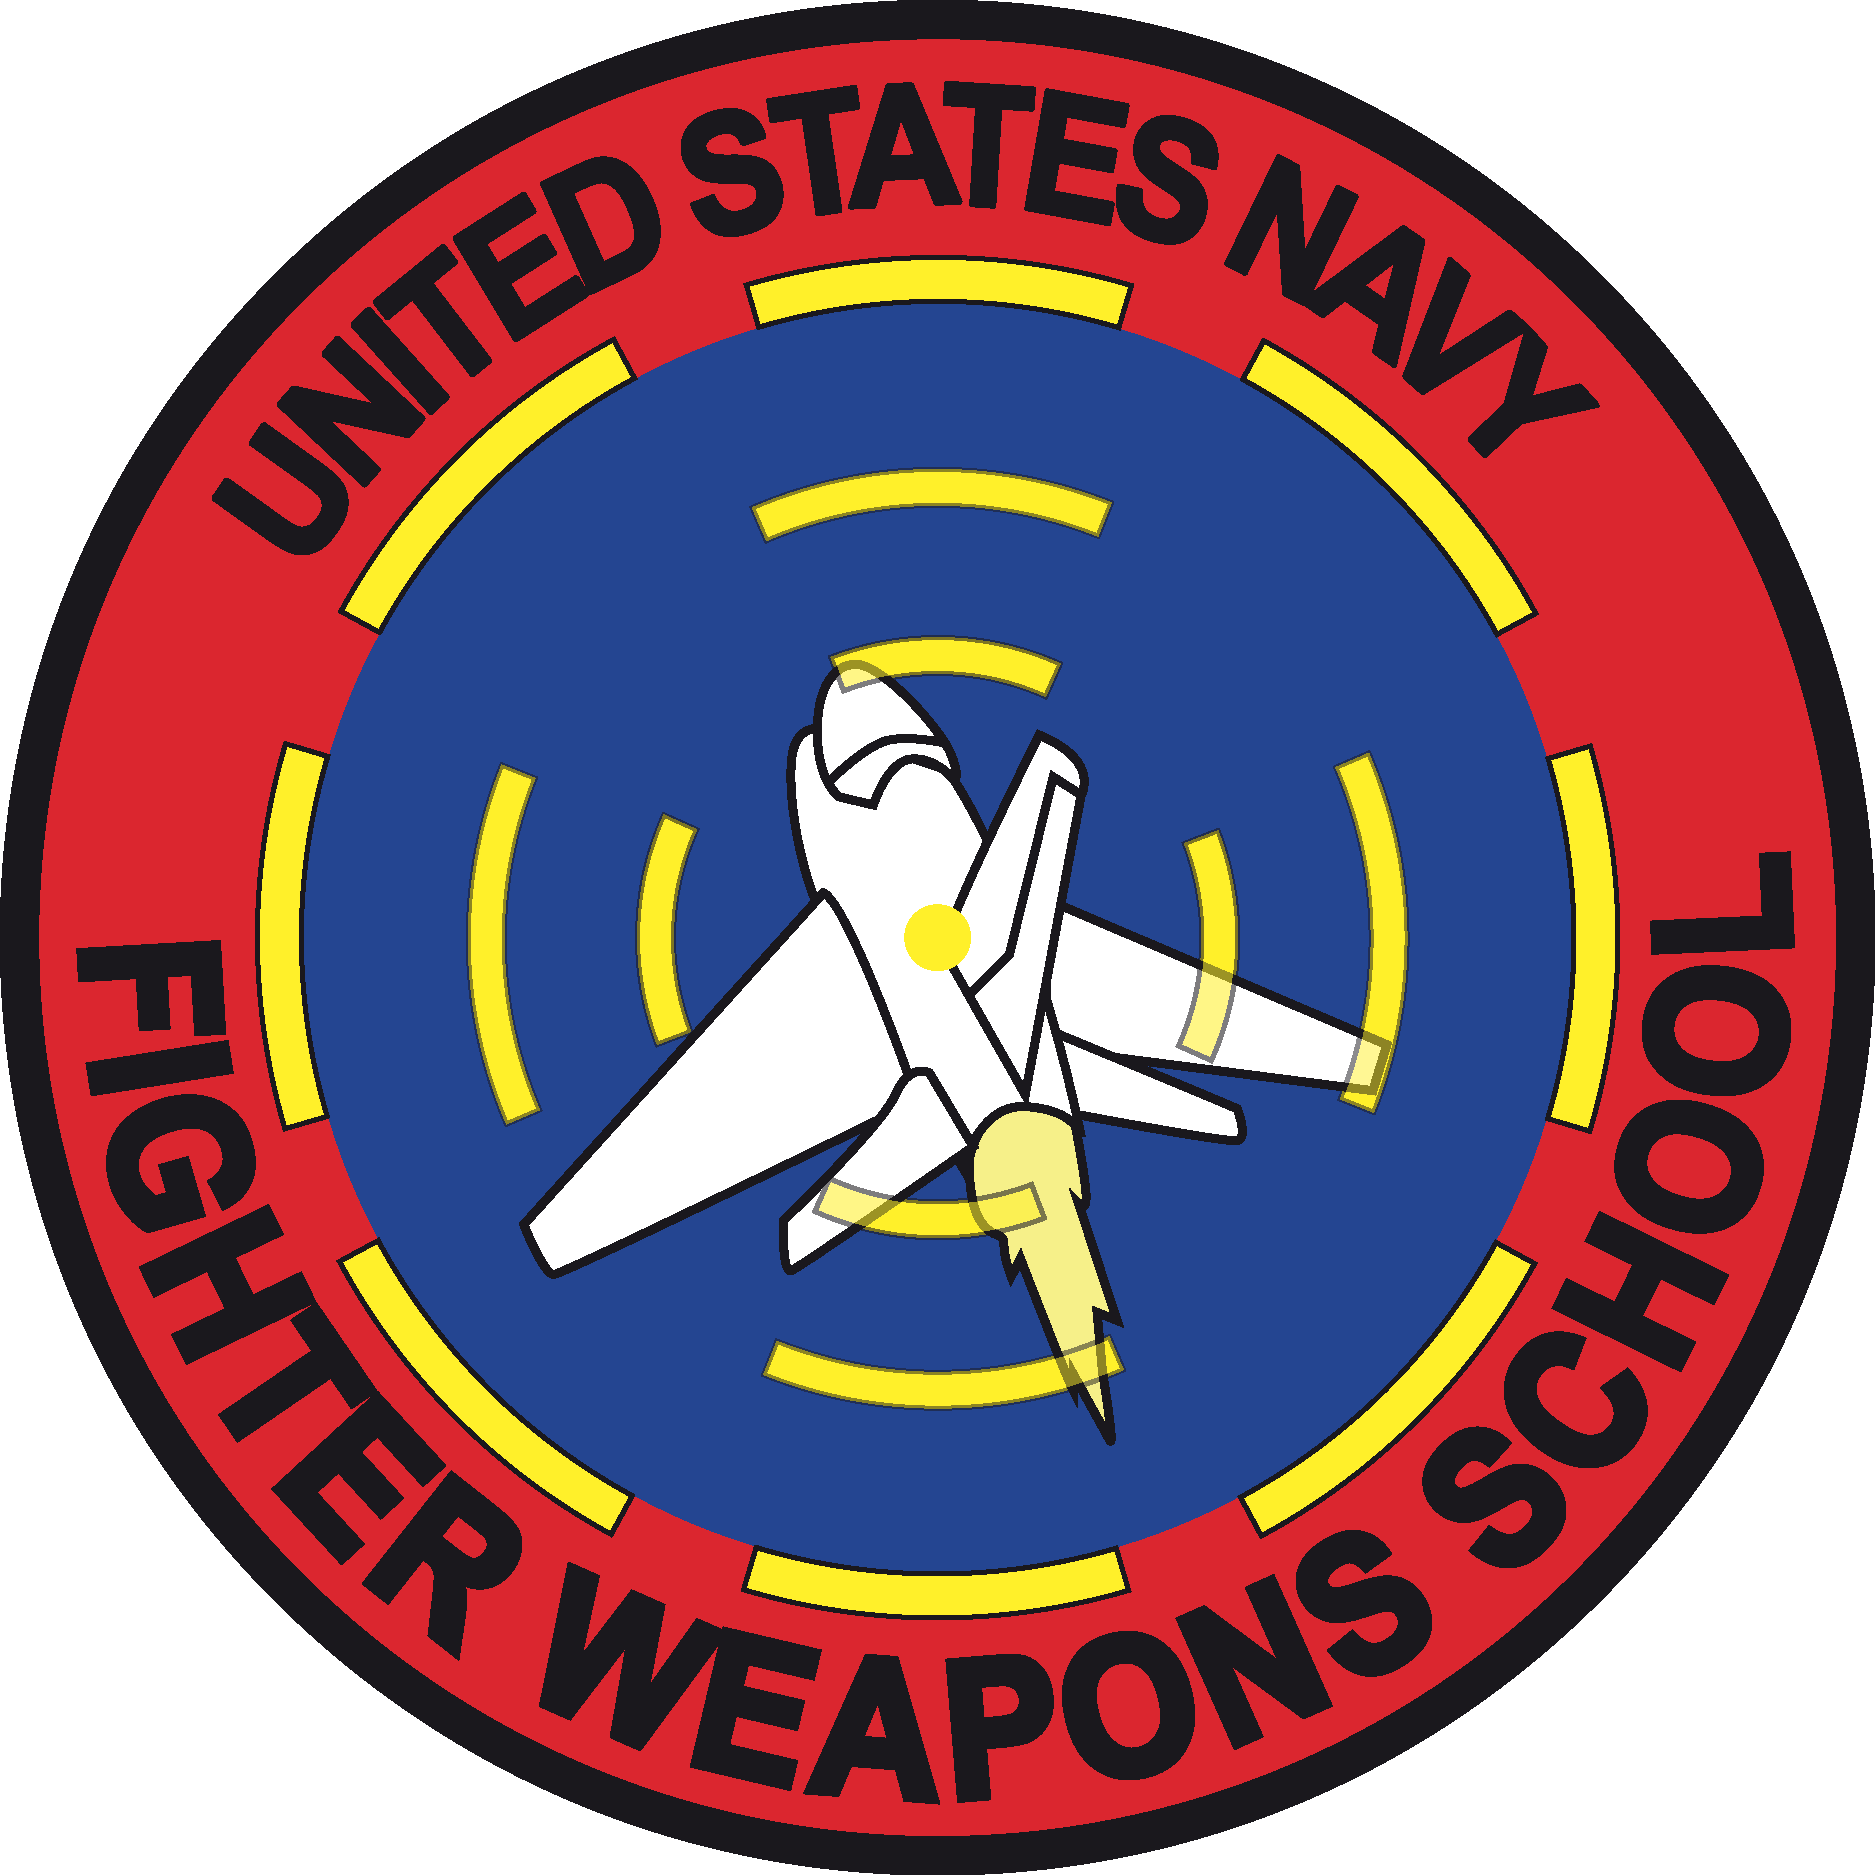 United States Navy Fighter Weapons School Logo Vector